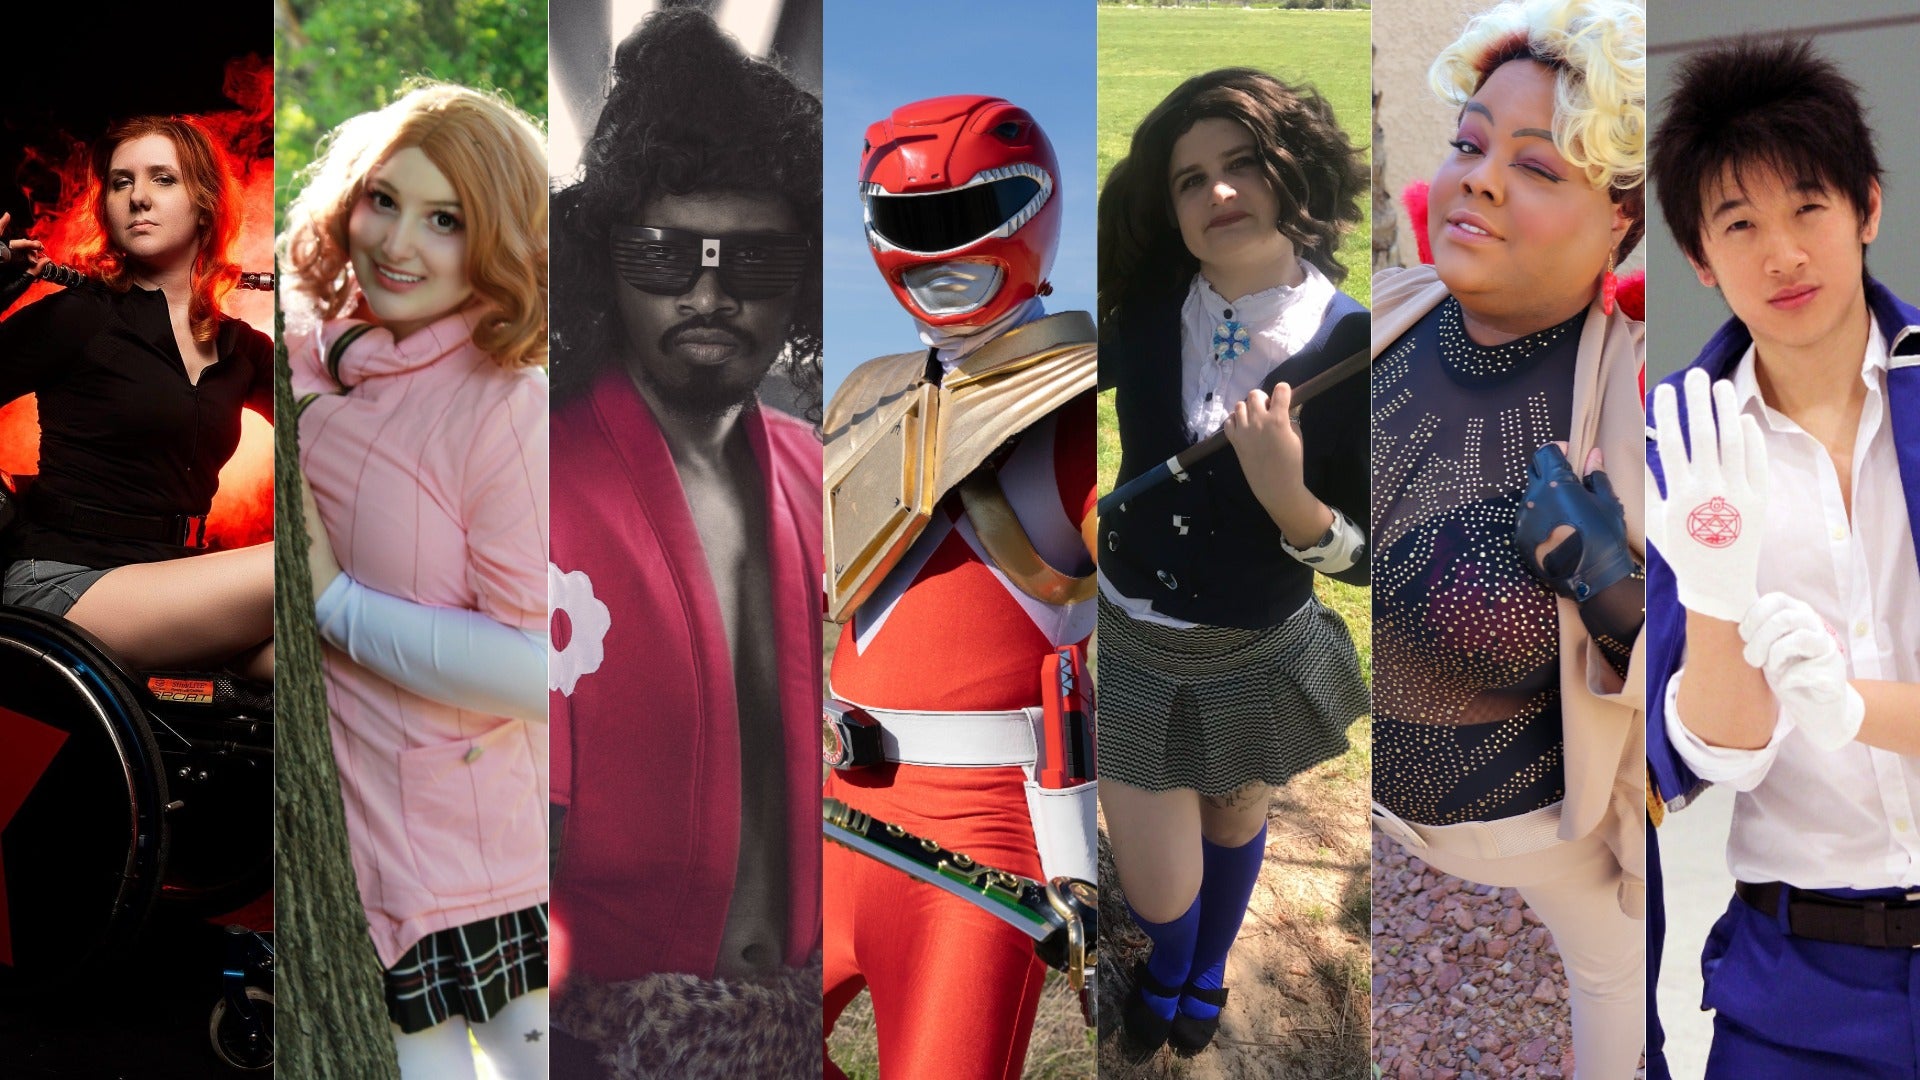 Cosplayers (from left to right): Alessia Mainardi, Ash, Bruthcosplay, Latin Nerd Cosplayer, Leah Ilana Craig, Midnight Pursona, and Roger Senpai.